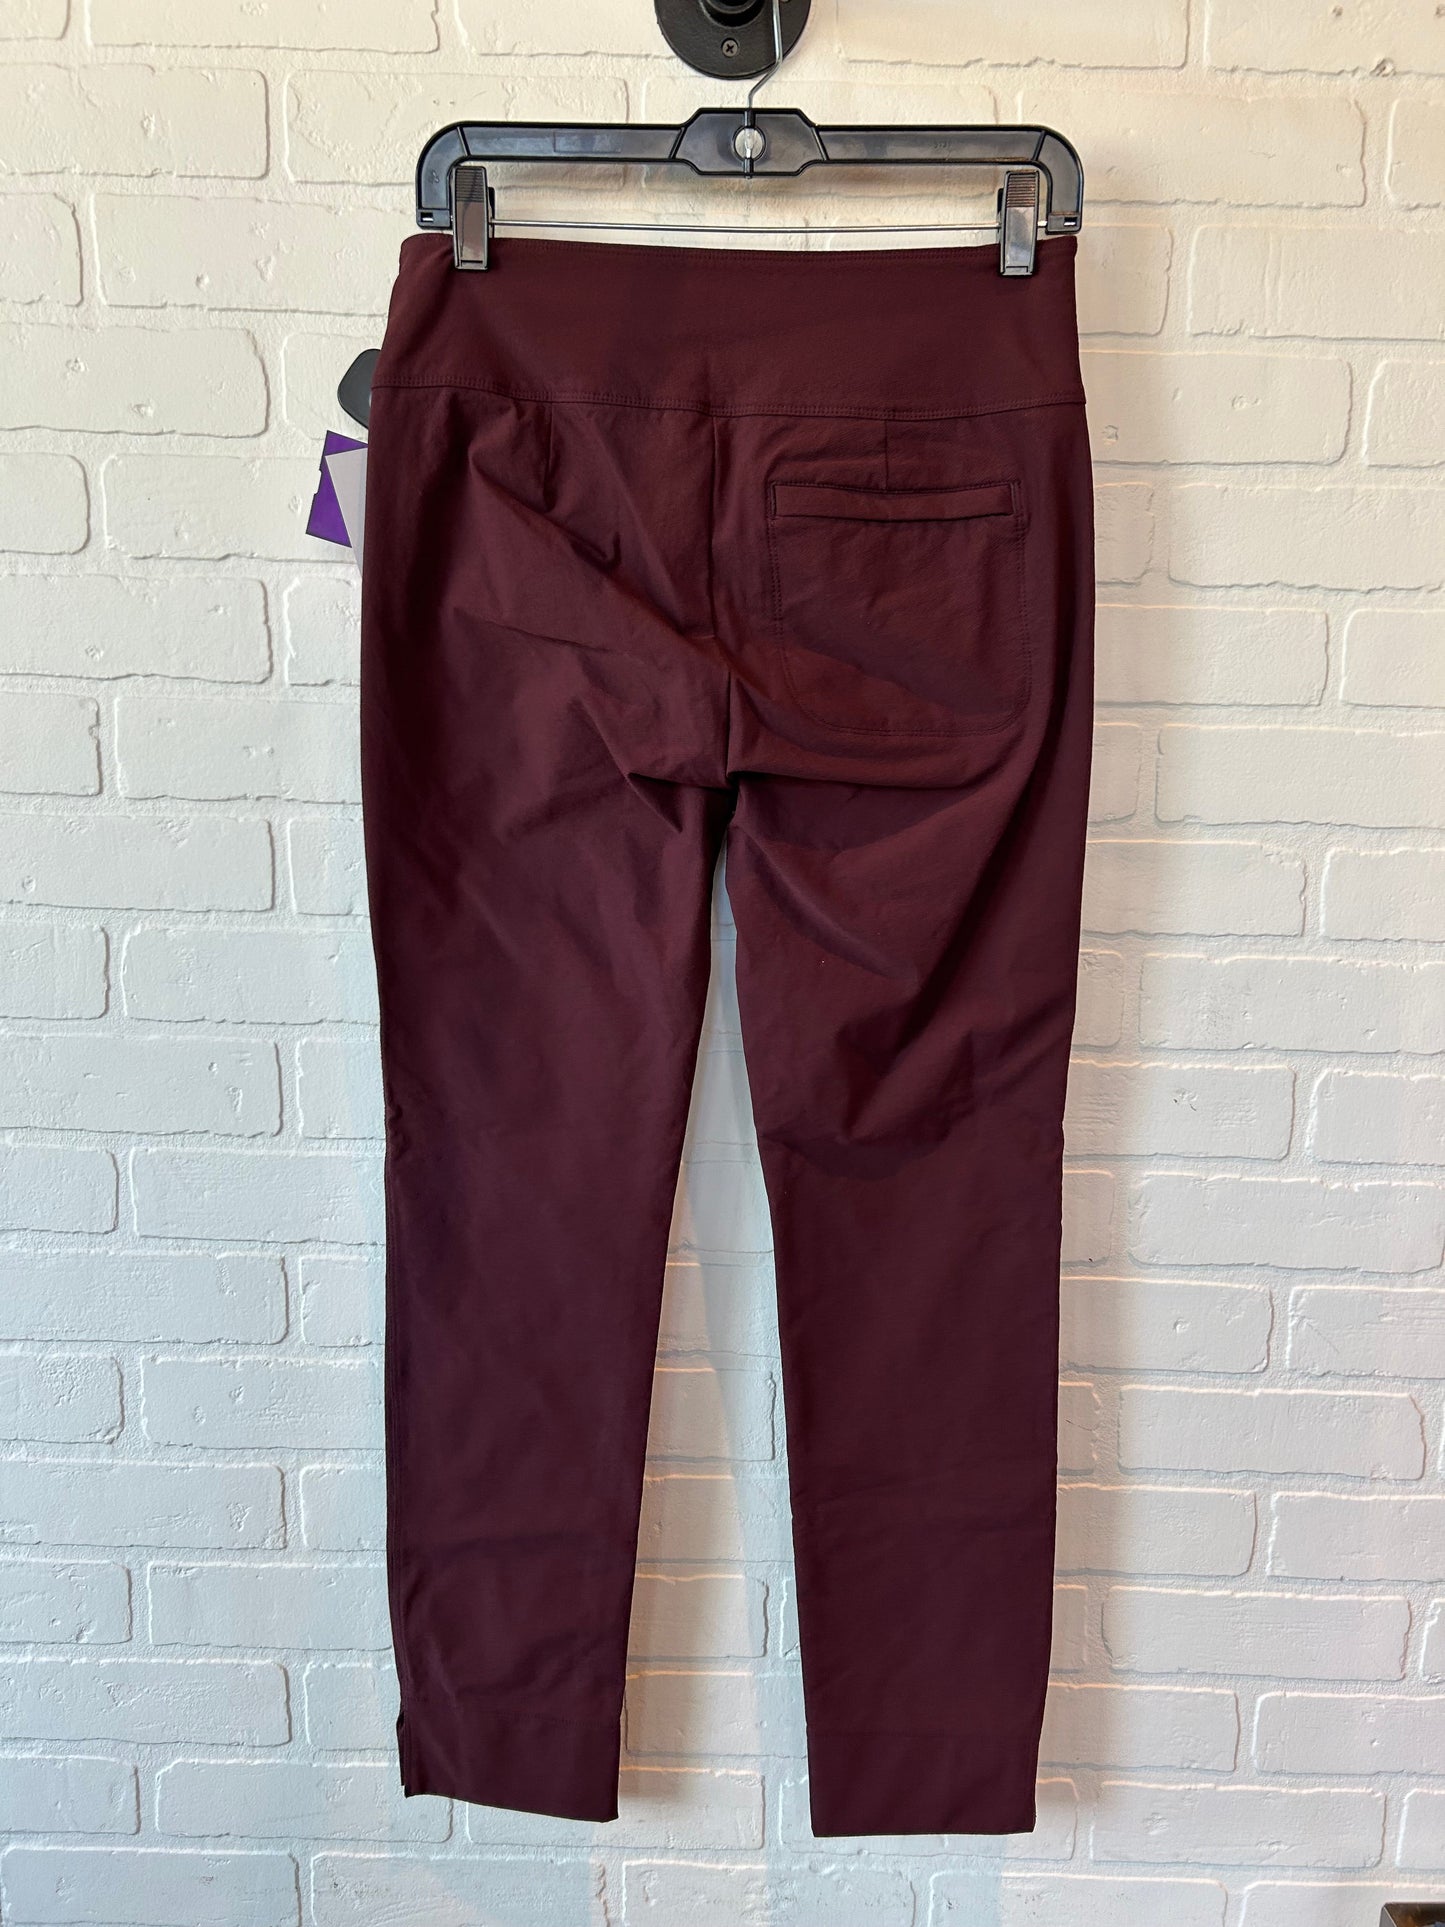 Red Athletic Pants Athleta, Size 6